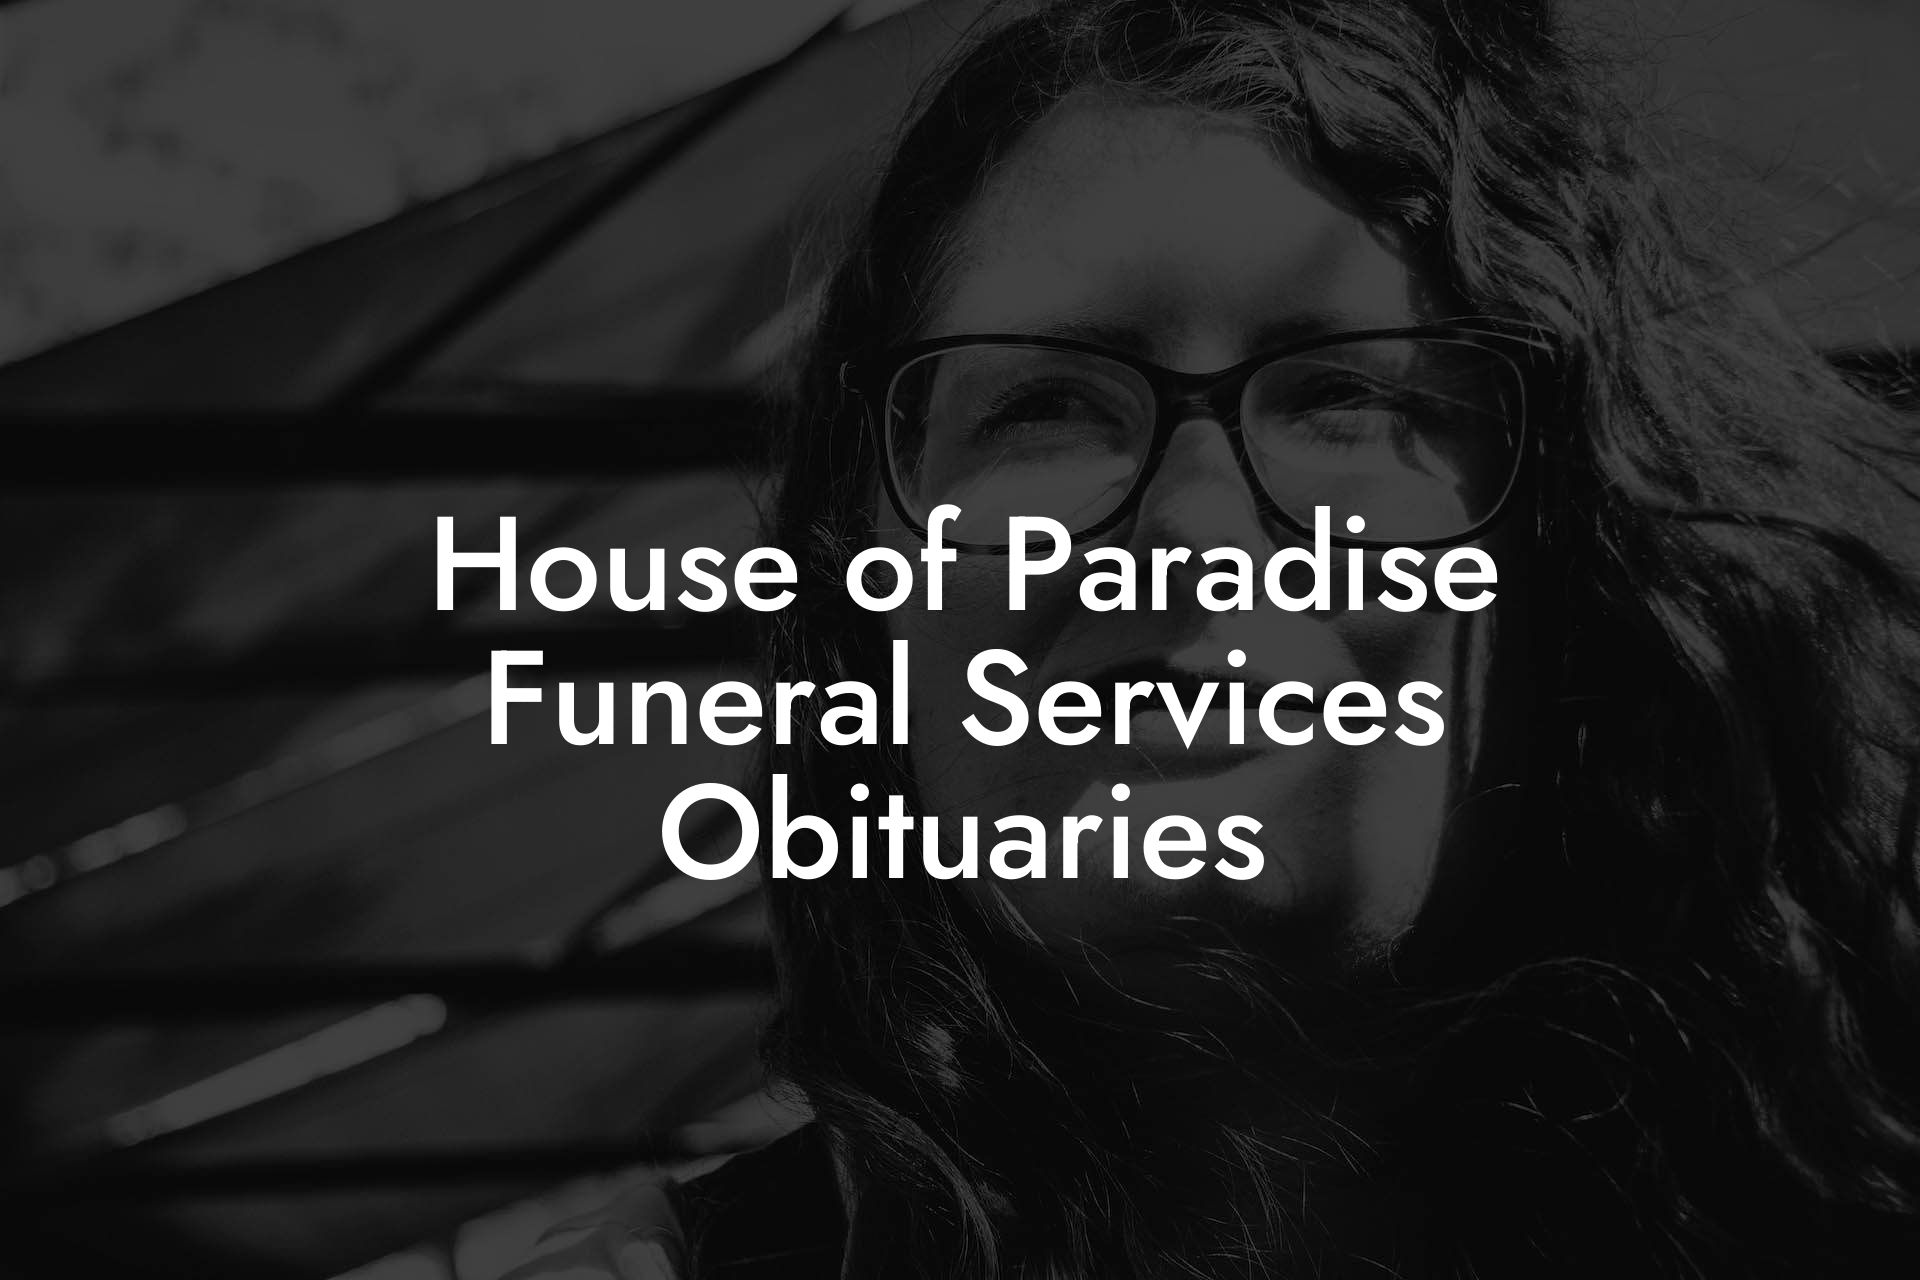 House of Paradise Funeral Services Obituaries